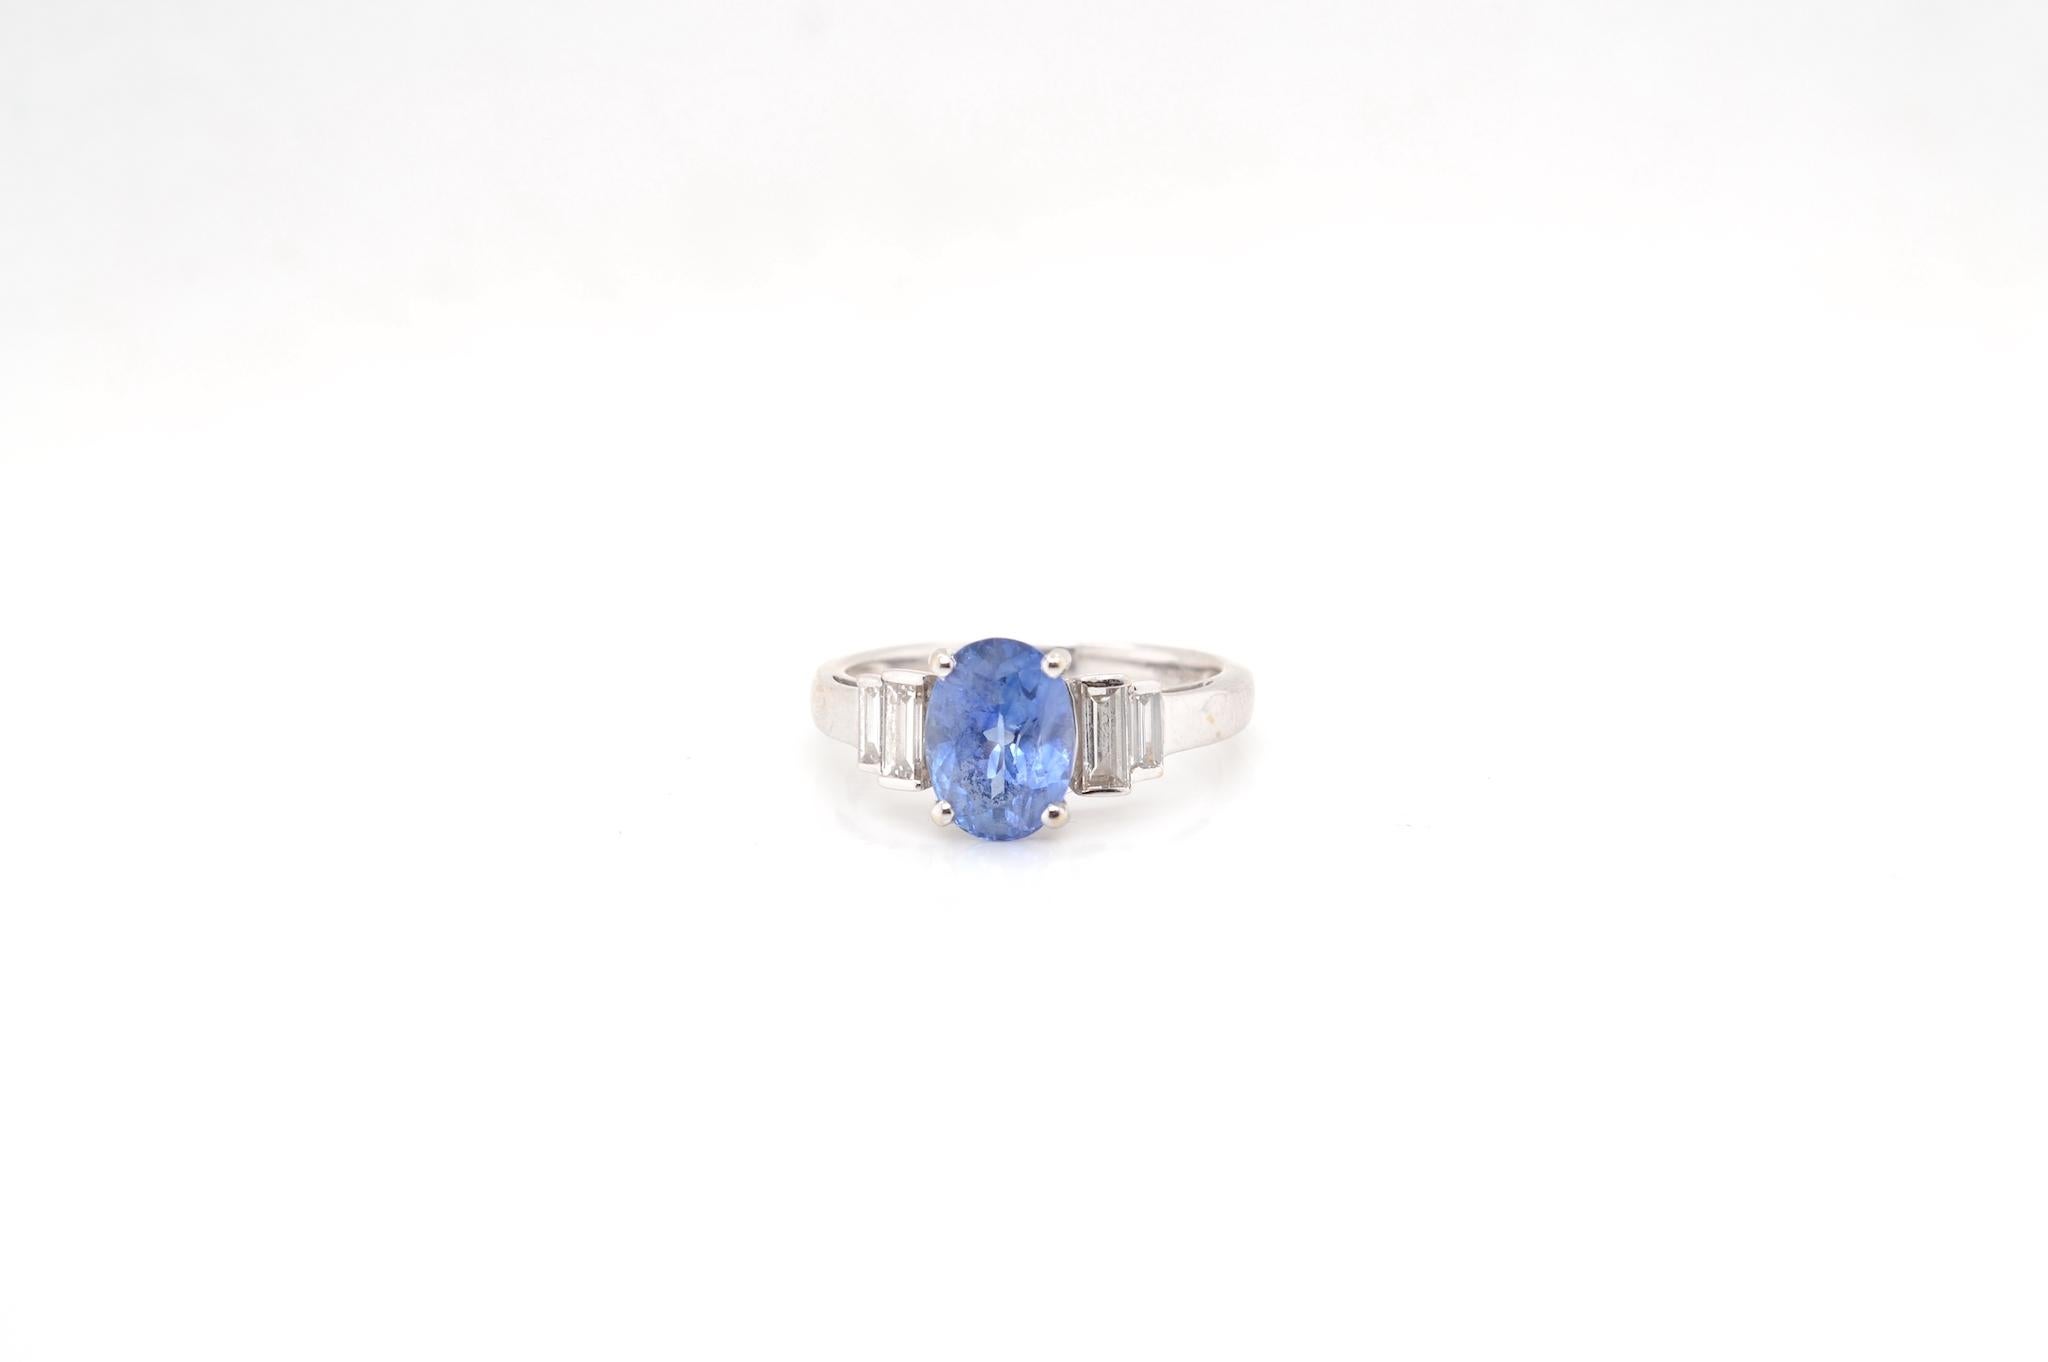 Stones: 2.28 carats Ceylon sapphire and baguette diamonds
for a total weight of 0.40 carat
Material: 18k white gold
Dimensions: 8.5 mm length on finger
Weight: 3.6g
Size: 52 (free sizing)
Certificate
Ref. : DV 24412